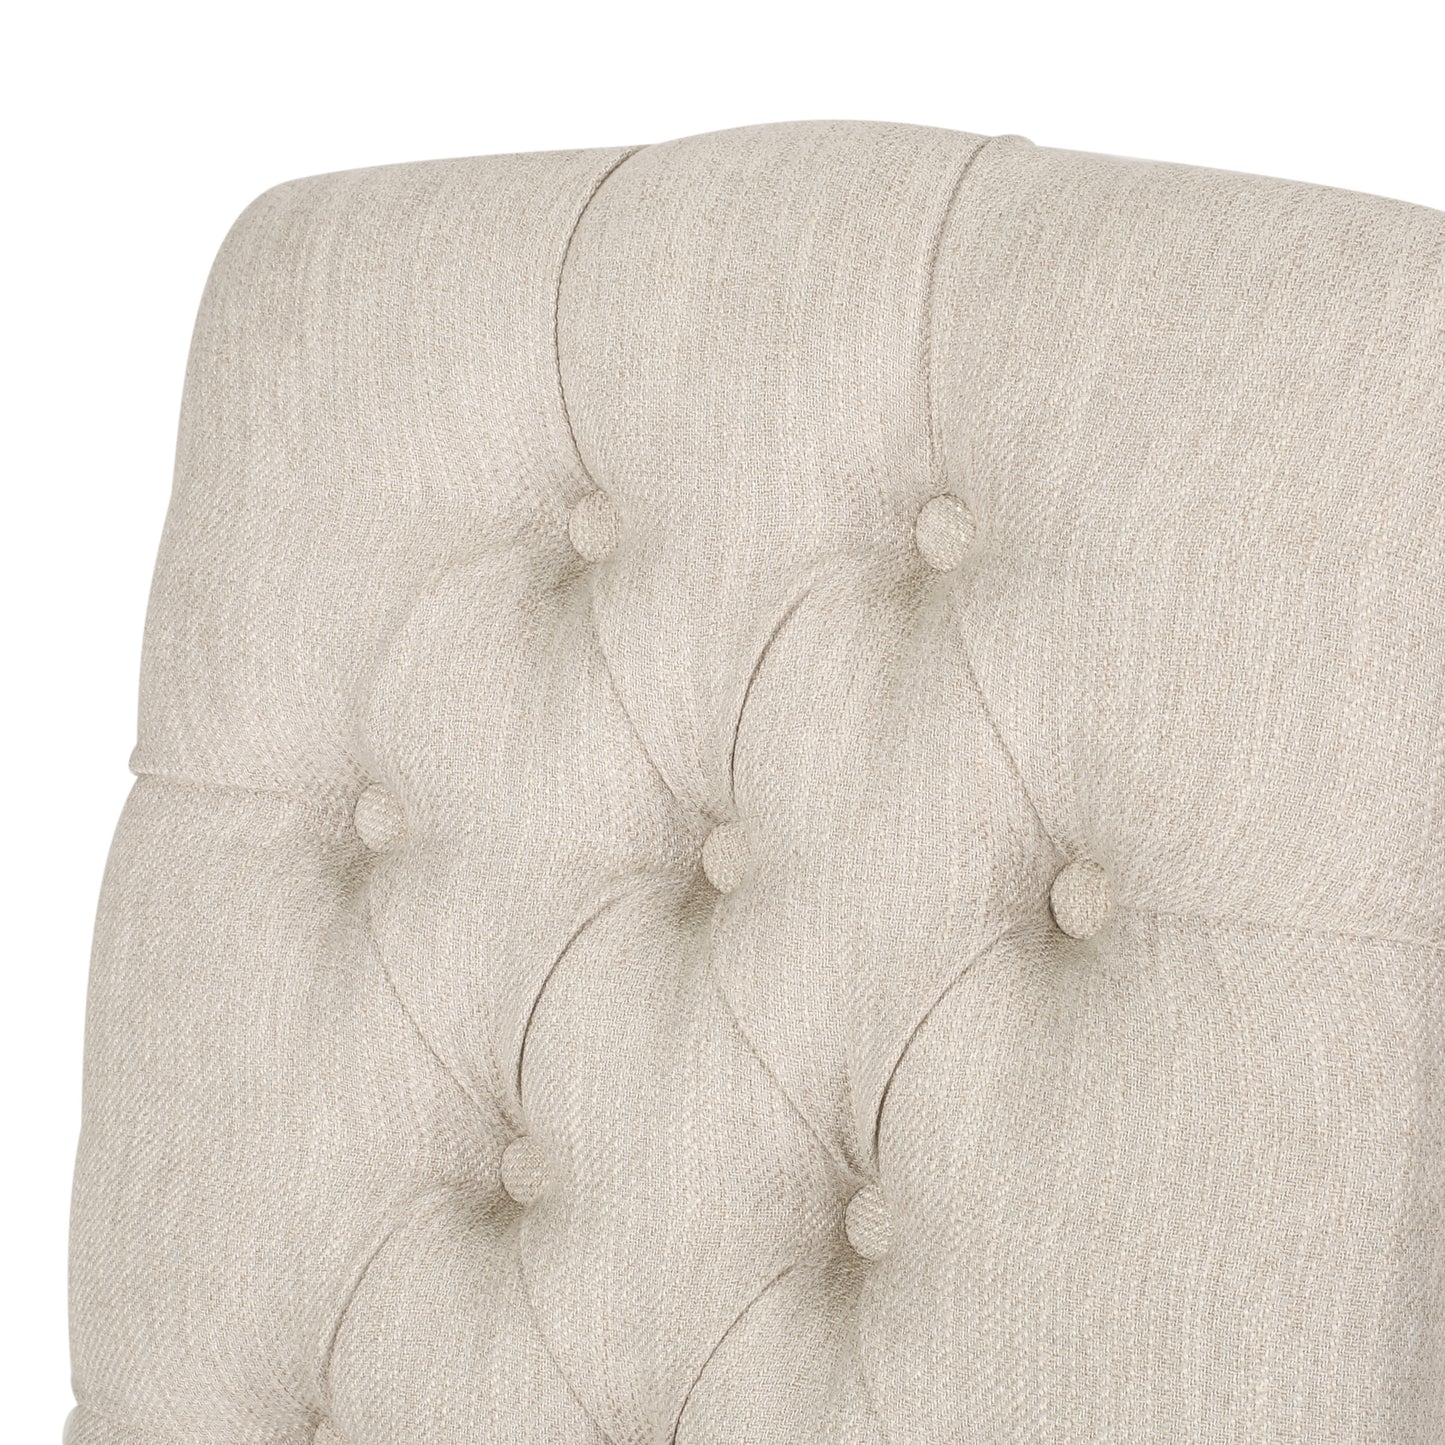 Frances Contemporary Fabric Tufted Dining Chairs with Nailhead Trim, Set of 2